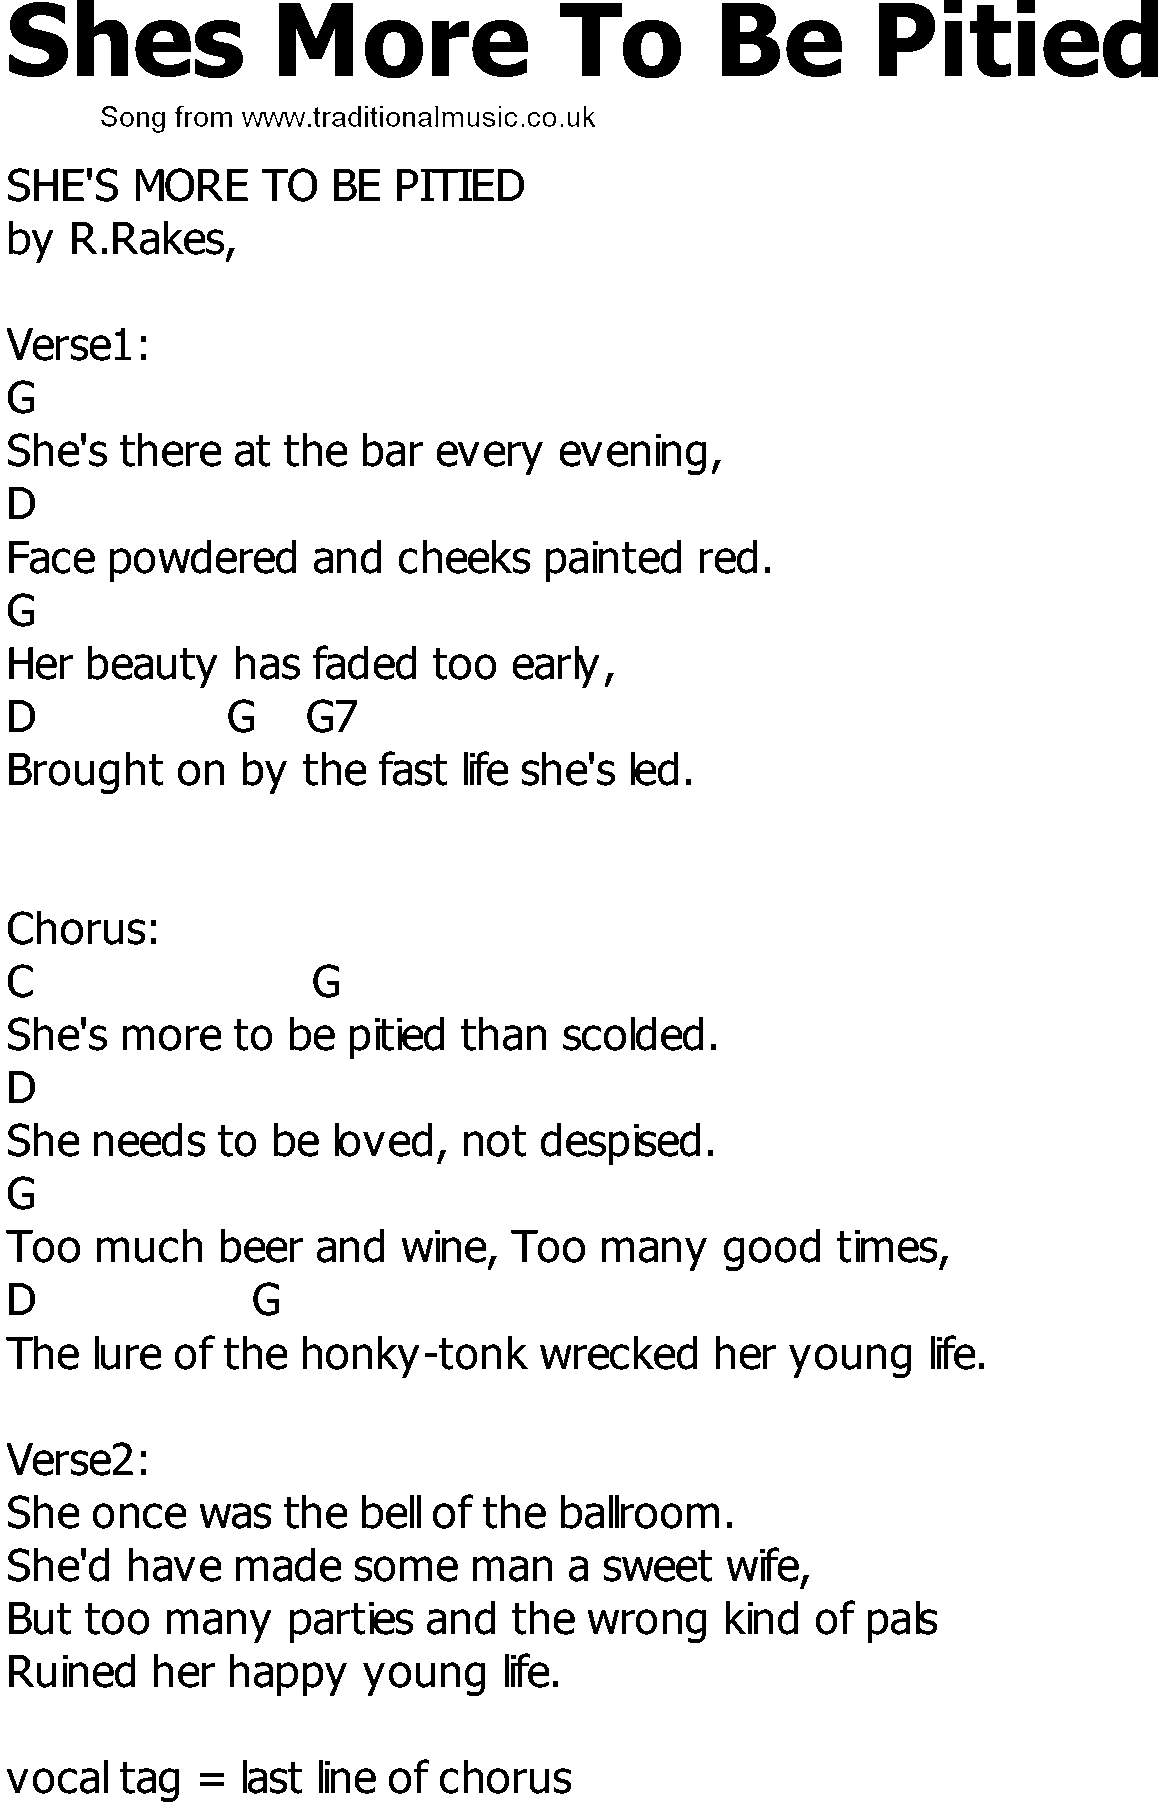 Old Country song lyrics with chords - Shes More To Be Pitied